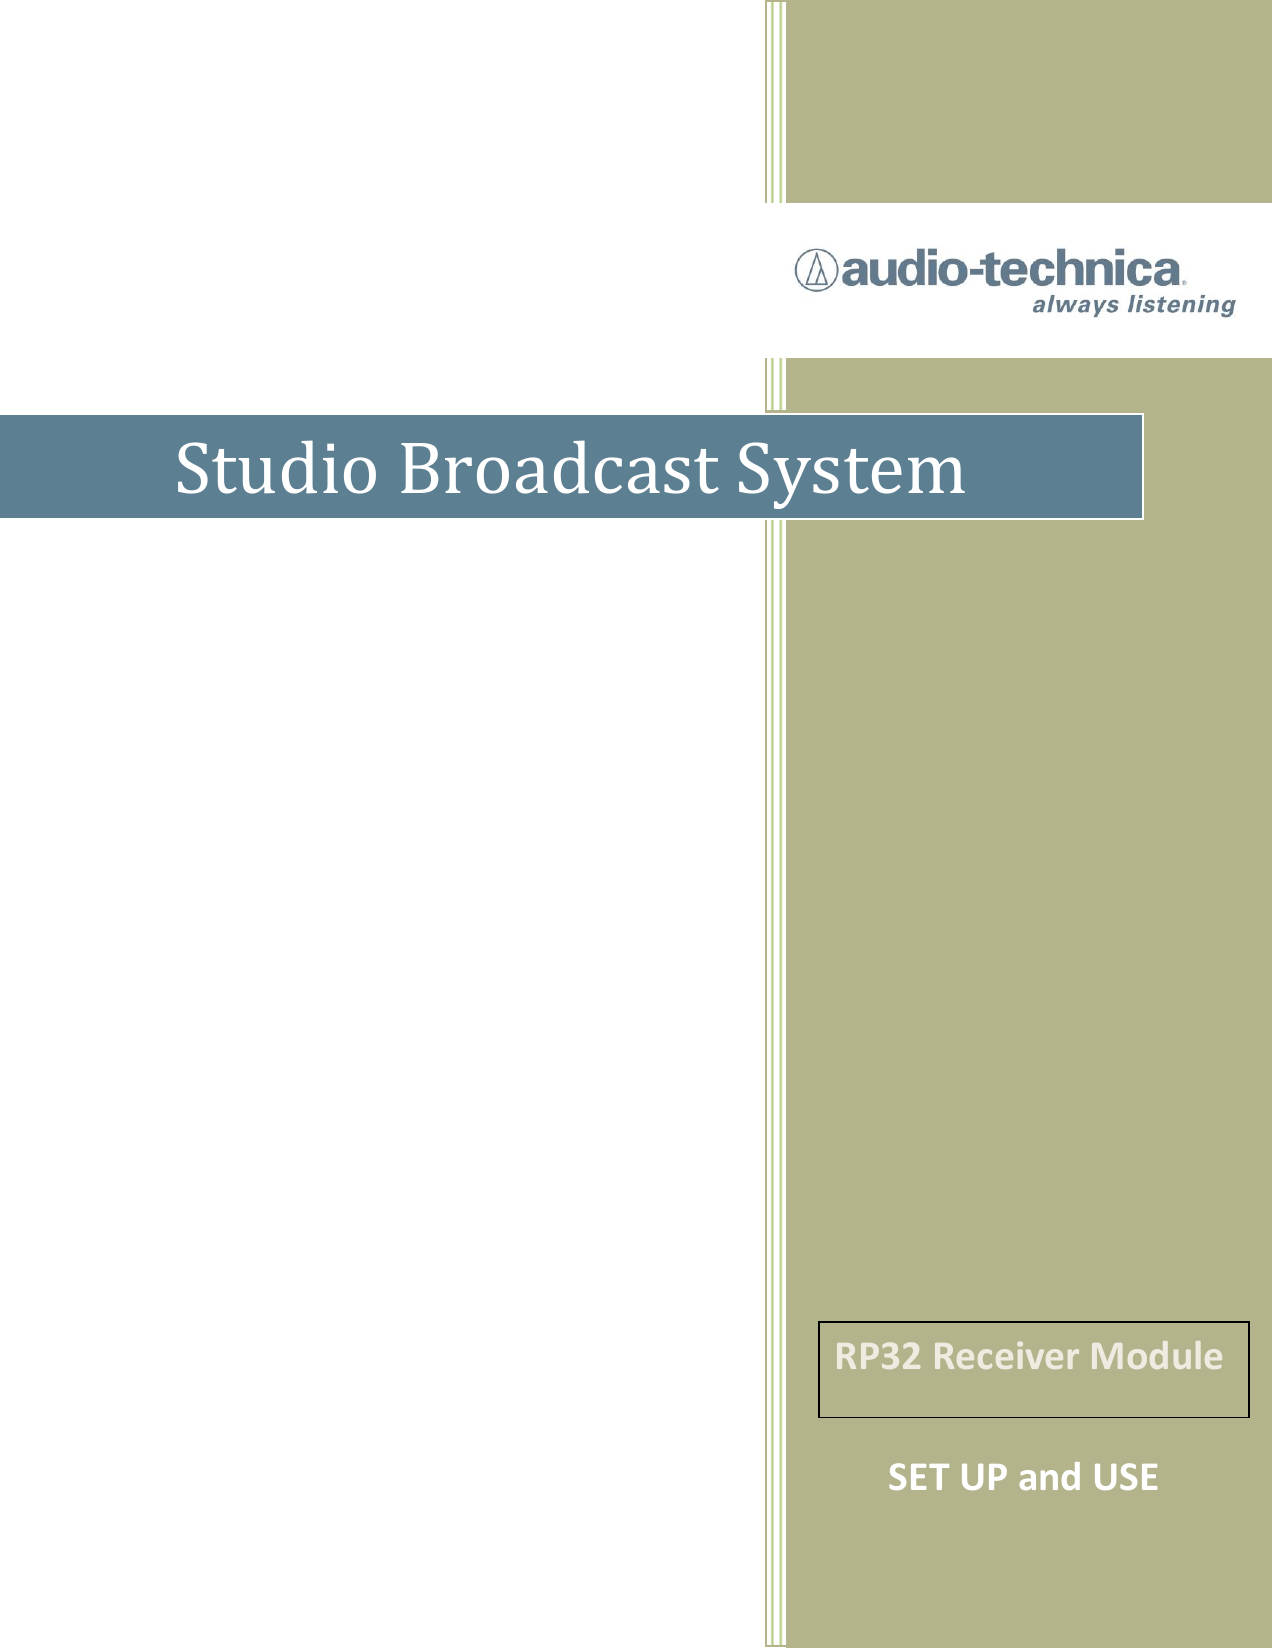        Studio Broadcast System SET UP and USE  RP32 Receiver Module 